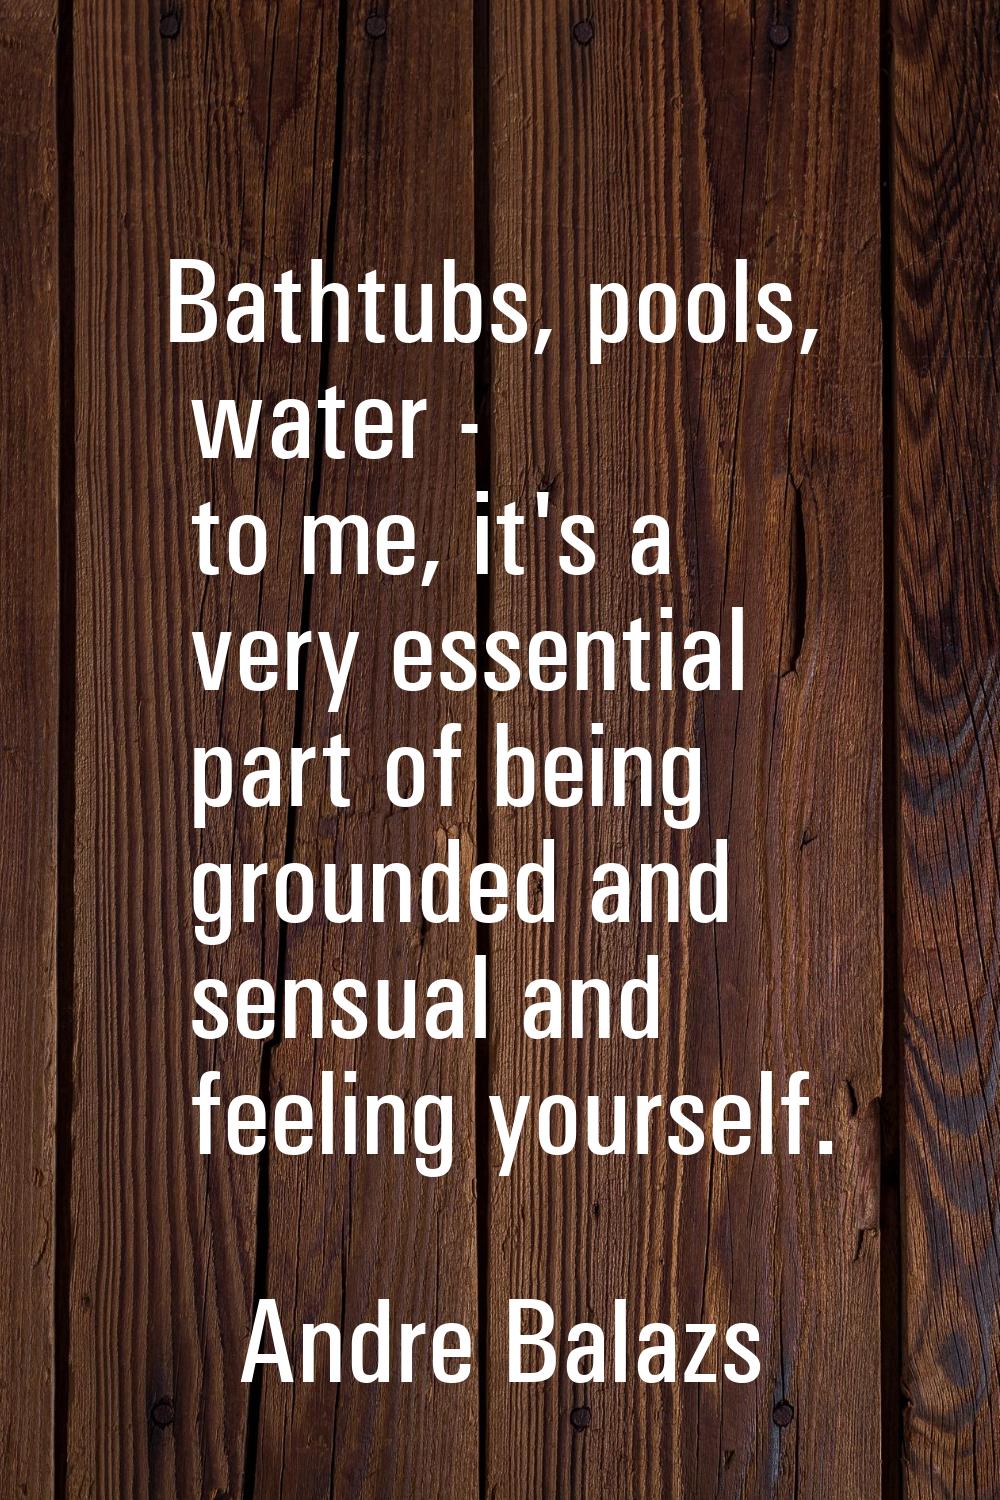 Bathtubs, pools, water - to me, it's a very essential part of being grounded and sensual and feelin